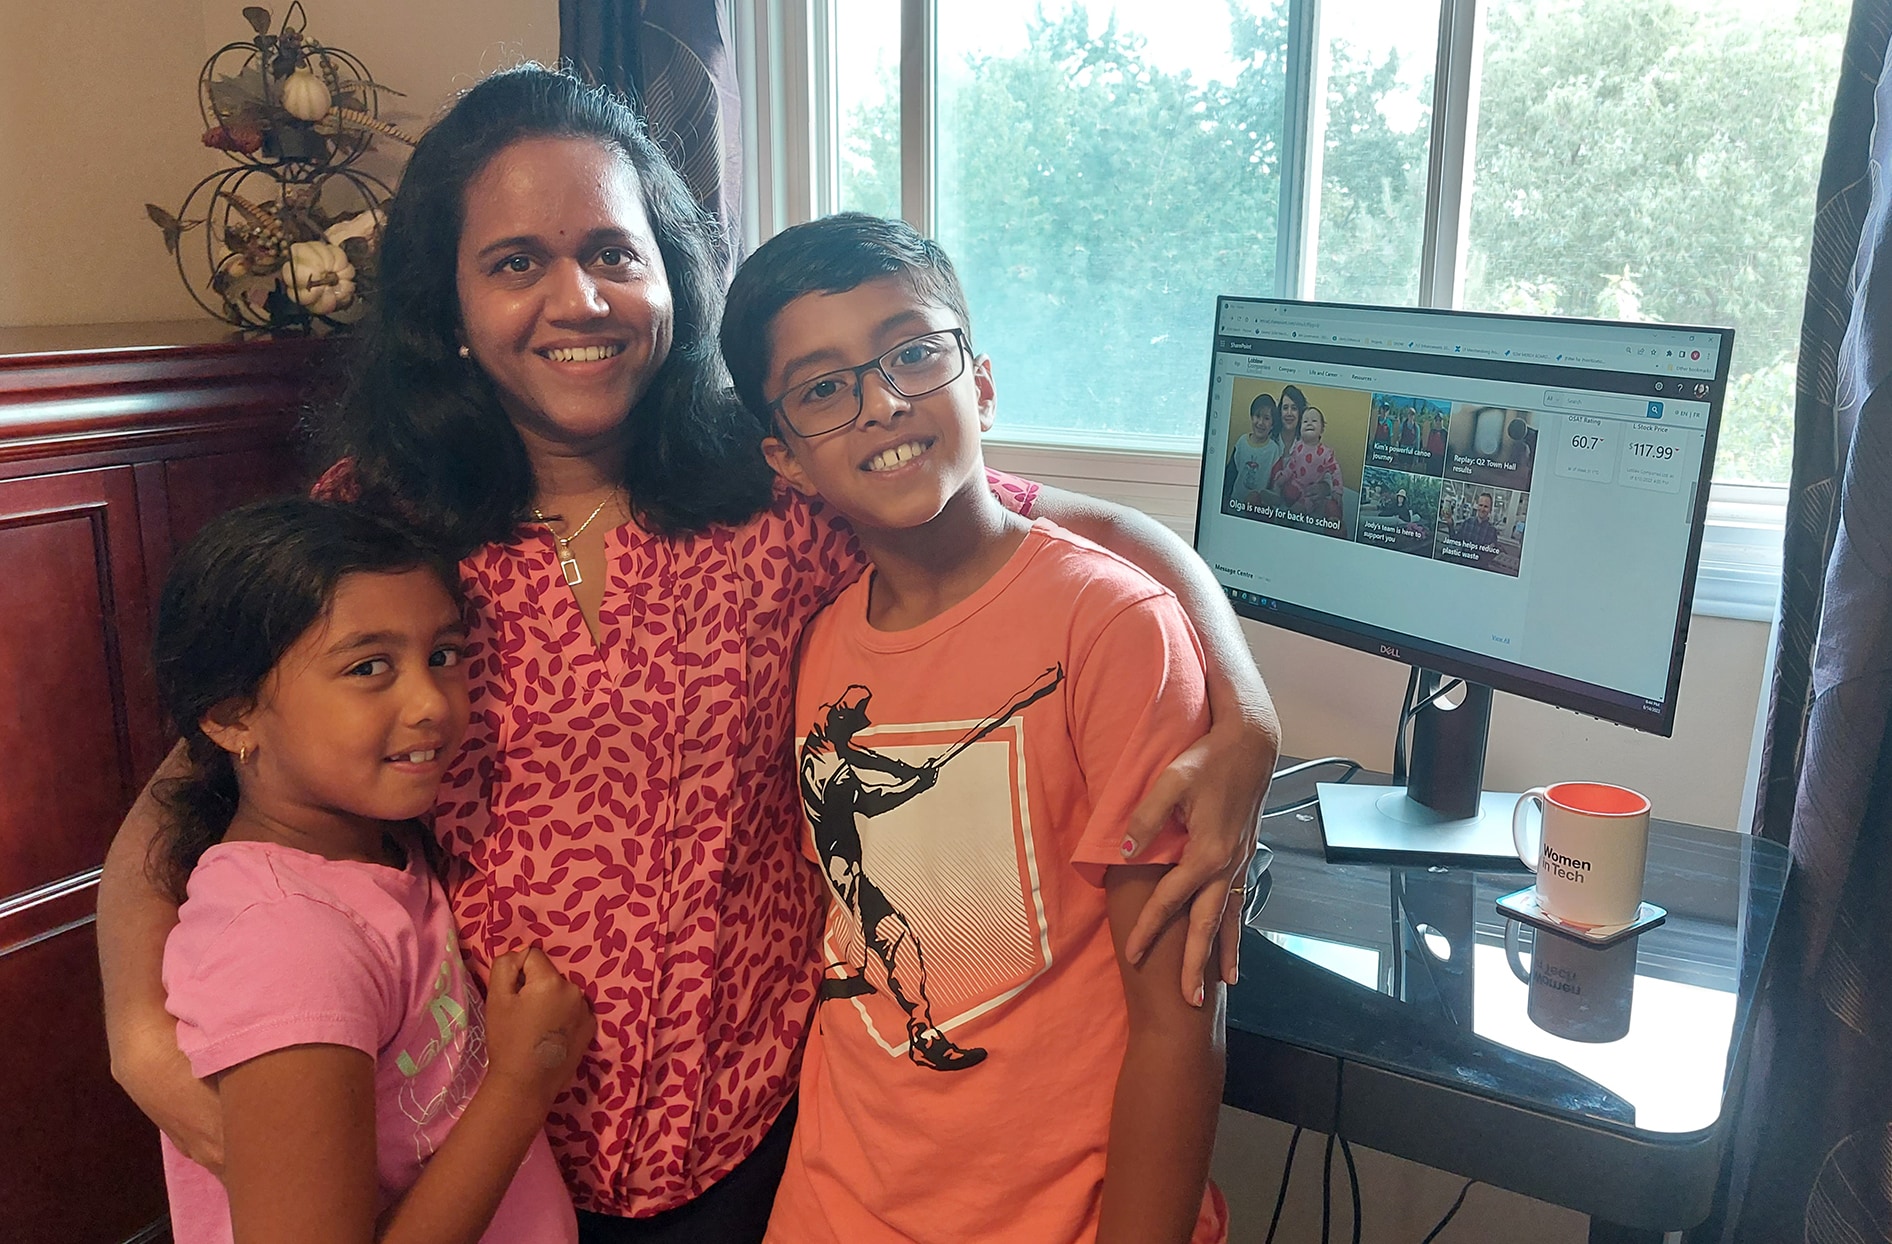 Vidya sits with her two kids inside her home office.